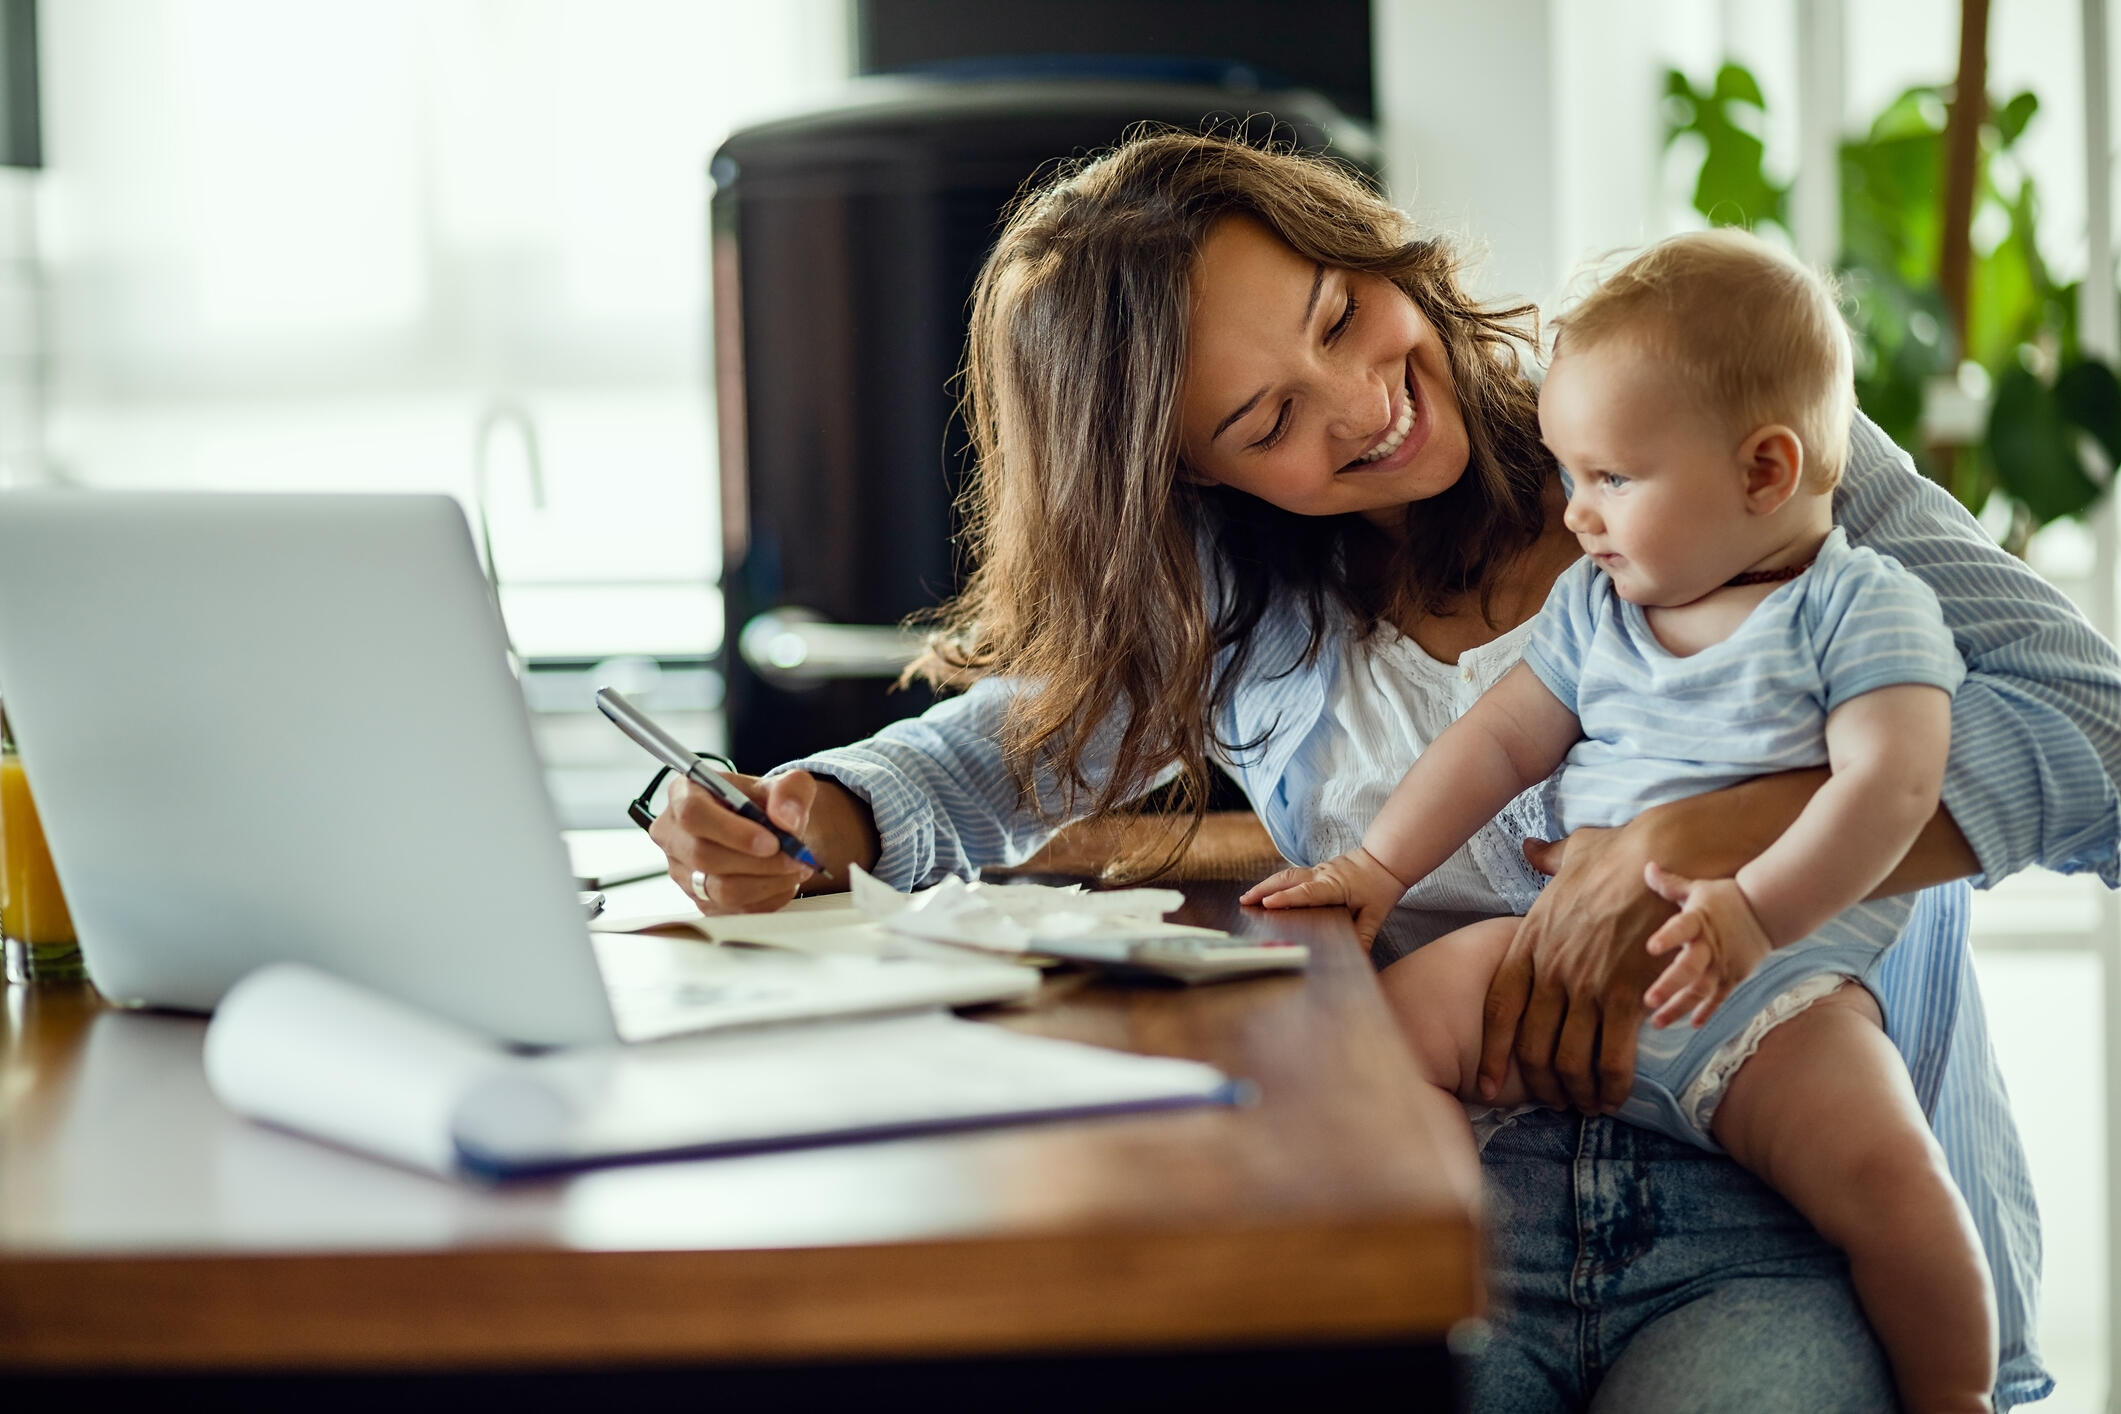 A woman holding a baby and smiling while sitting in front of a laptop. 